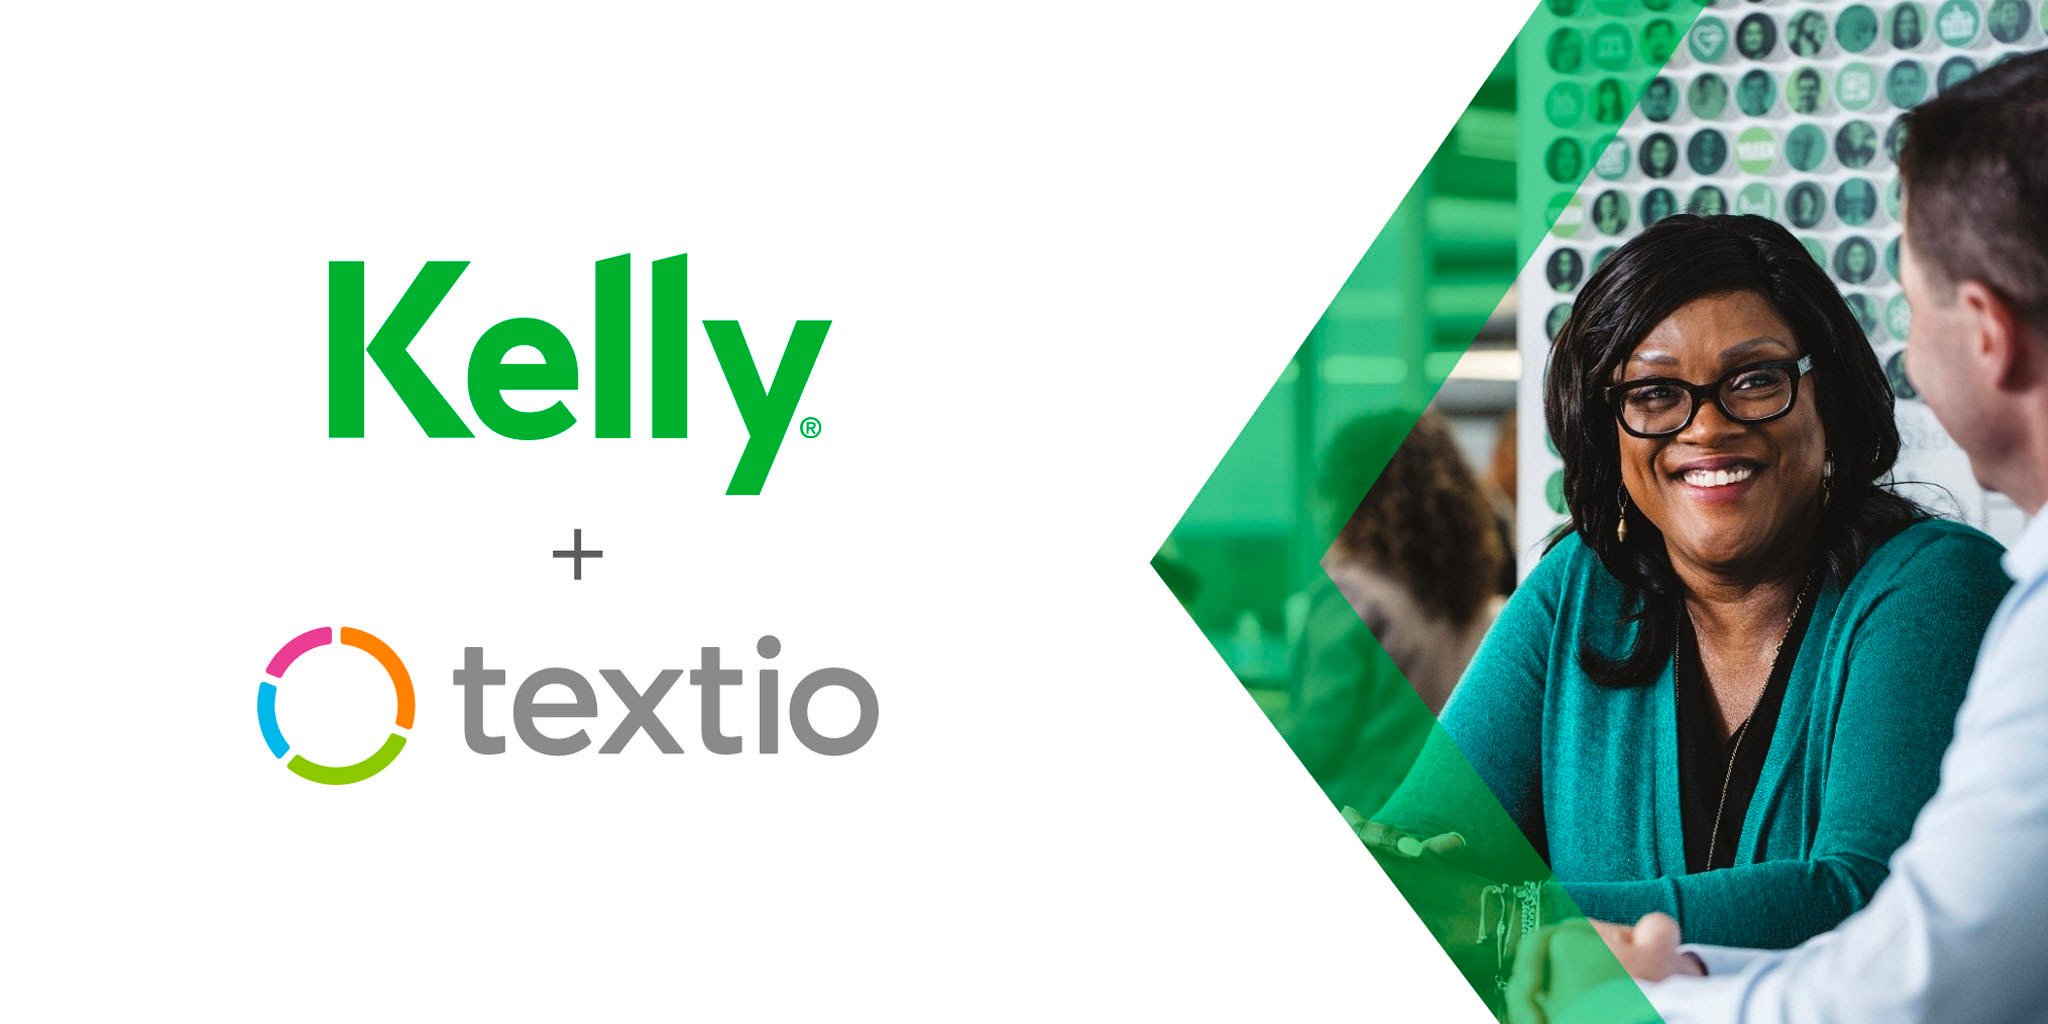 Kelly Services and Textio logo lockup with image of two Kelly employees talking